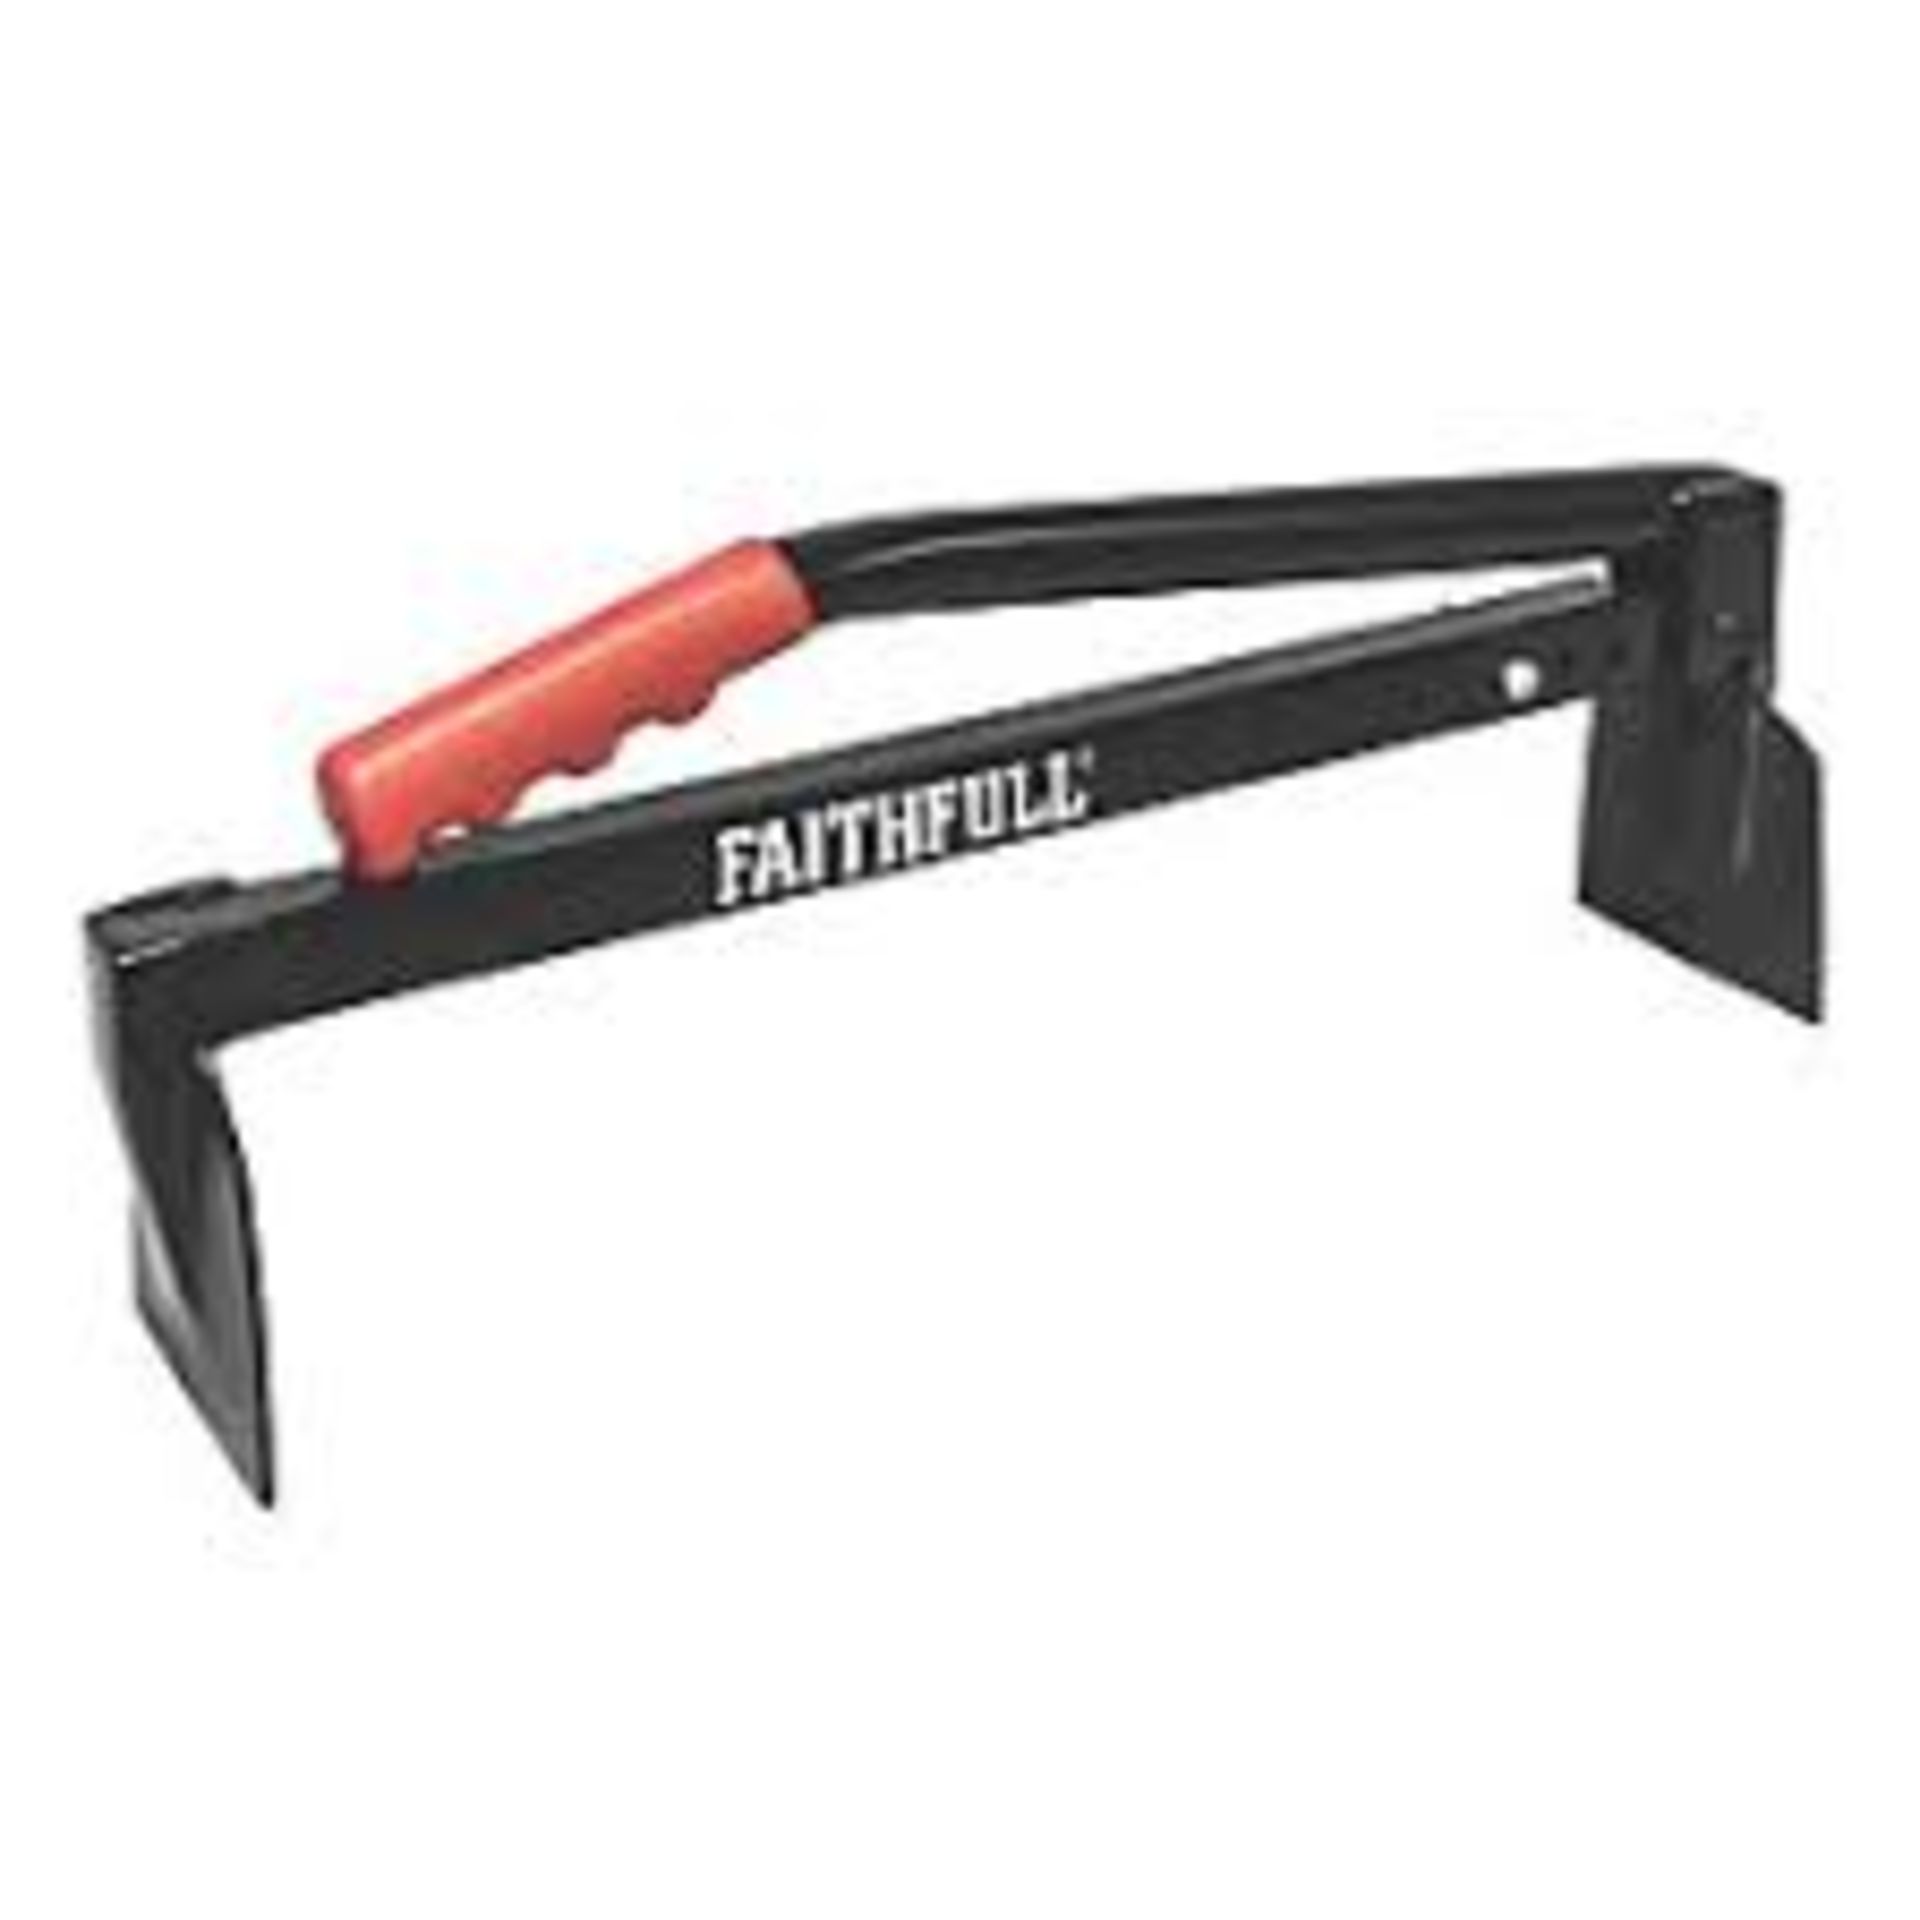 FAITHFULL BRICK LIFTER. - ER46. Enables single-handed lifting of bricks and blocks by cantilever